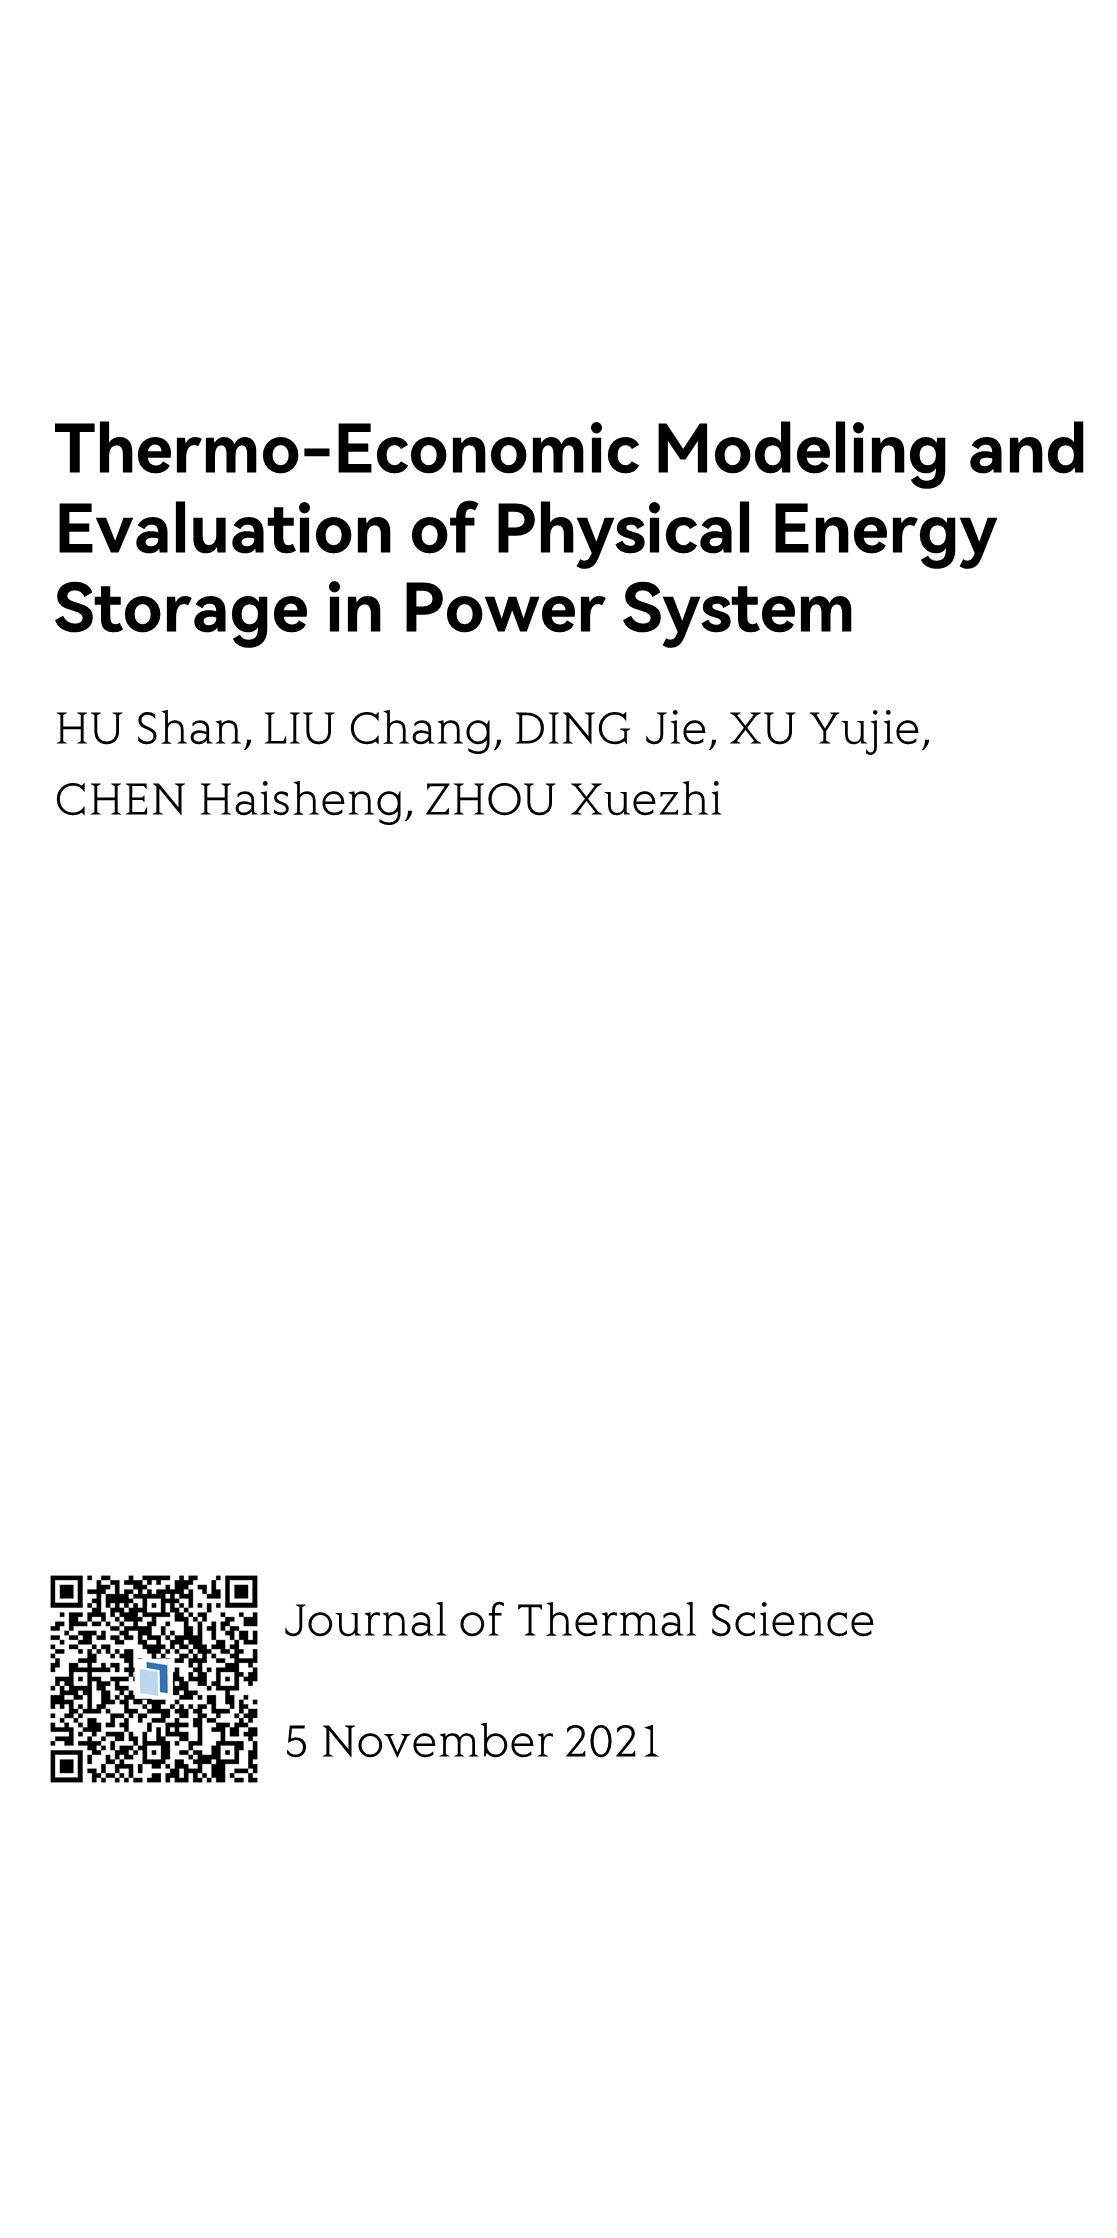 Thermo-Economic Modeling and Evaluation of Physical Energy Storage in Power System_1